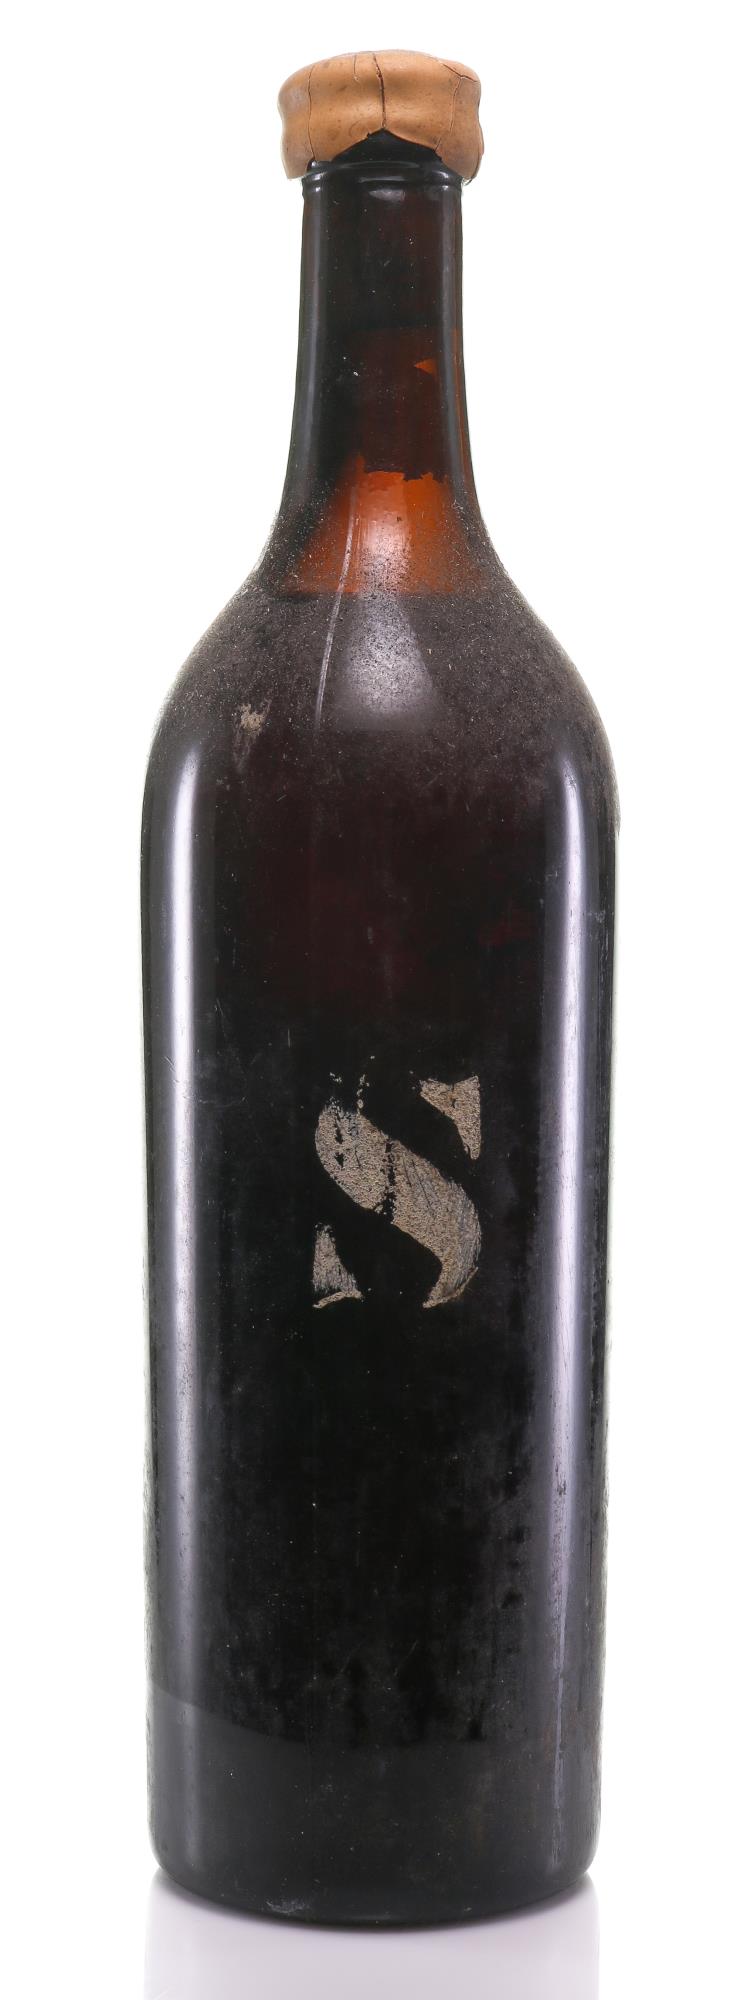 Rare Madeira Sercial with 'S' Stamp, Very Old & Authentic, Limited Availability - Vintage - Rue Pinard